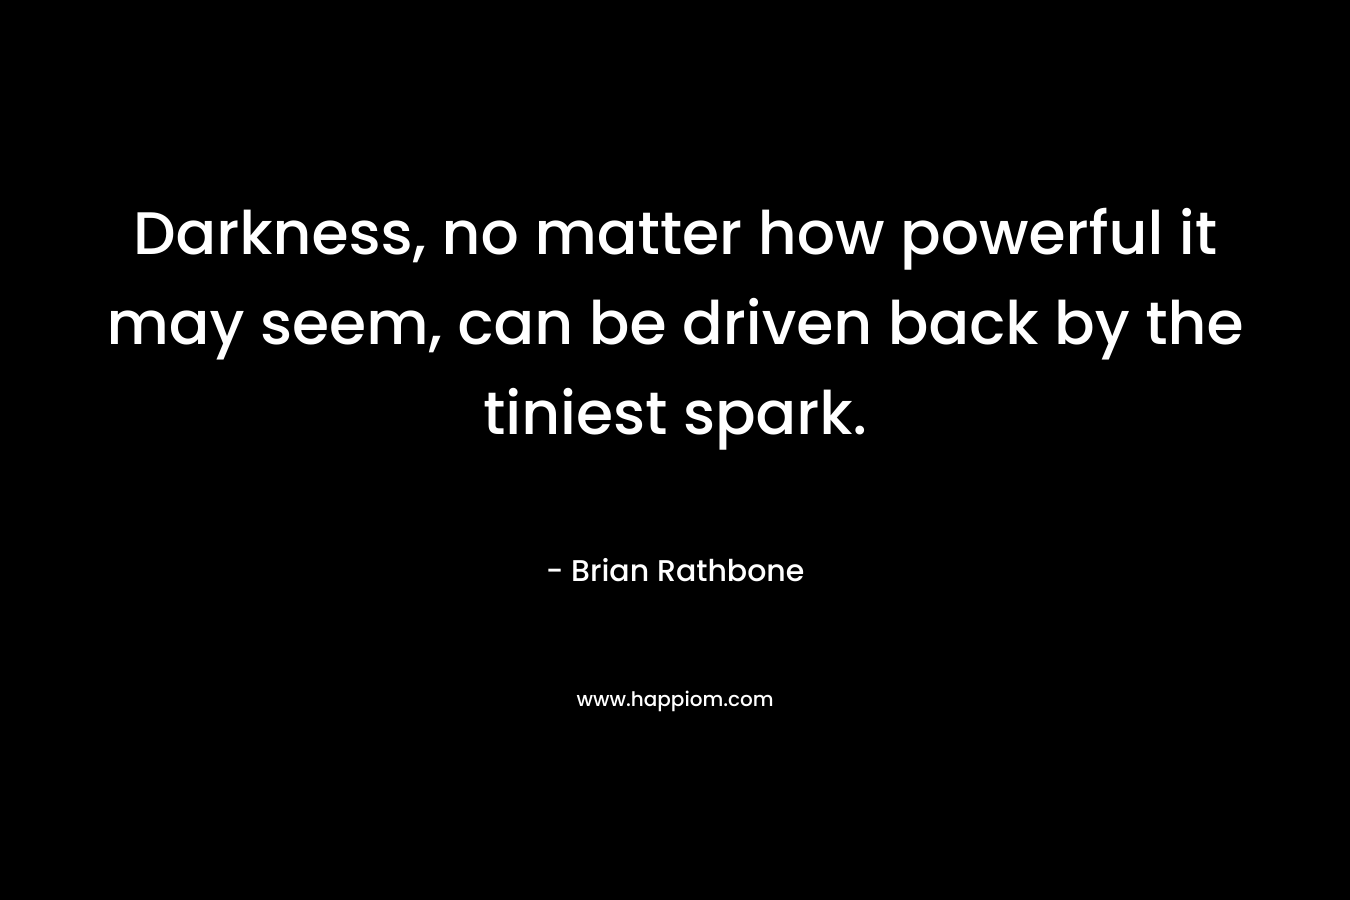 Darkness, no matter how powerful it may seem, can be driven back by the tiniest spark. – Brian Rathbone